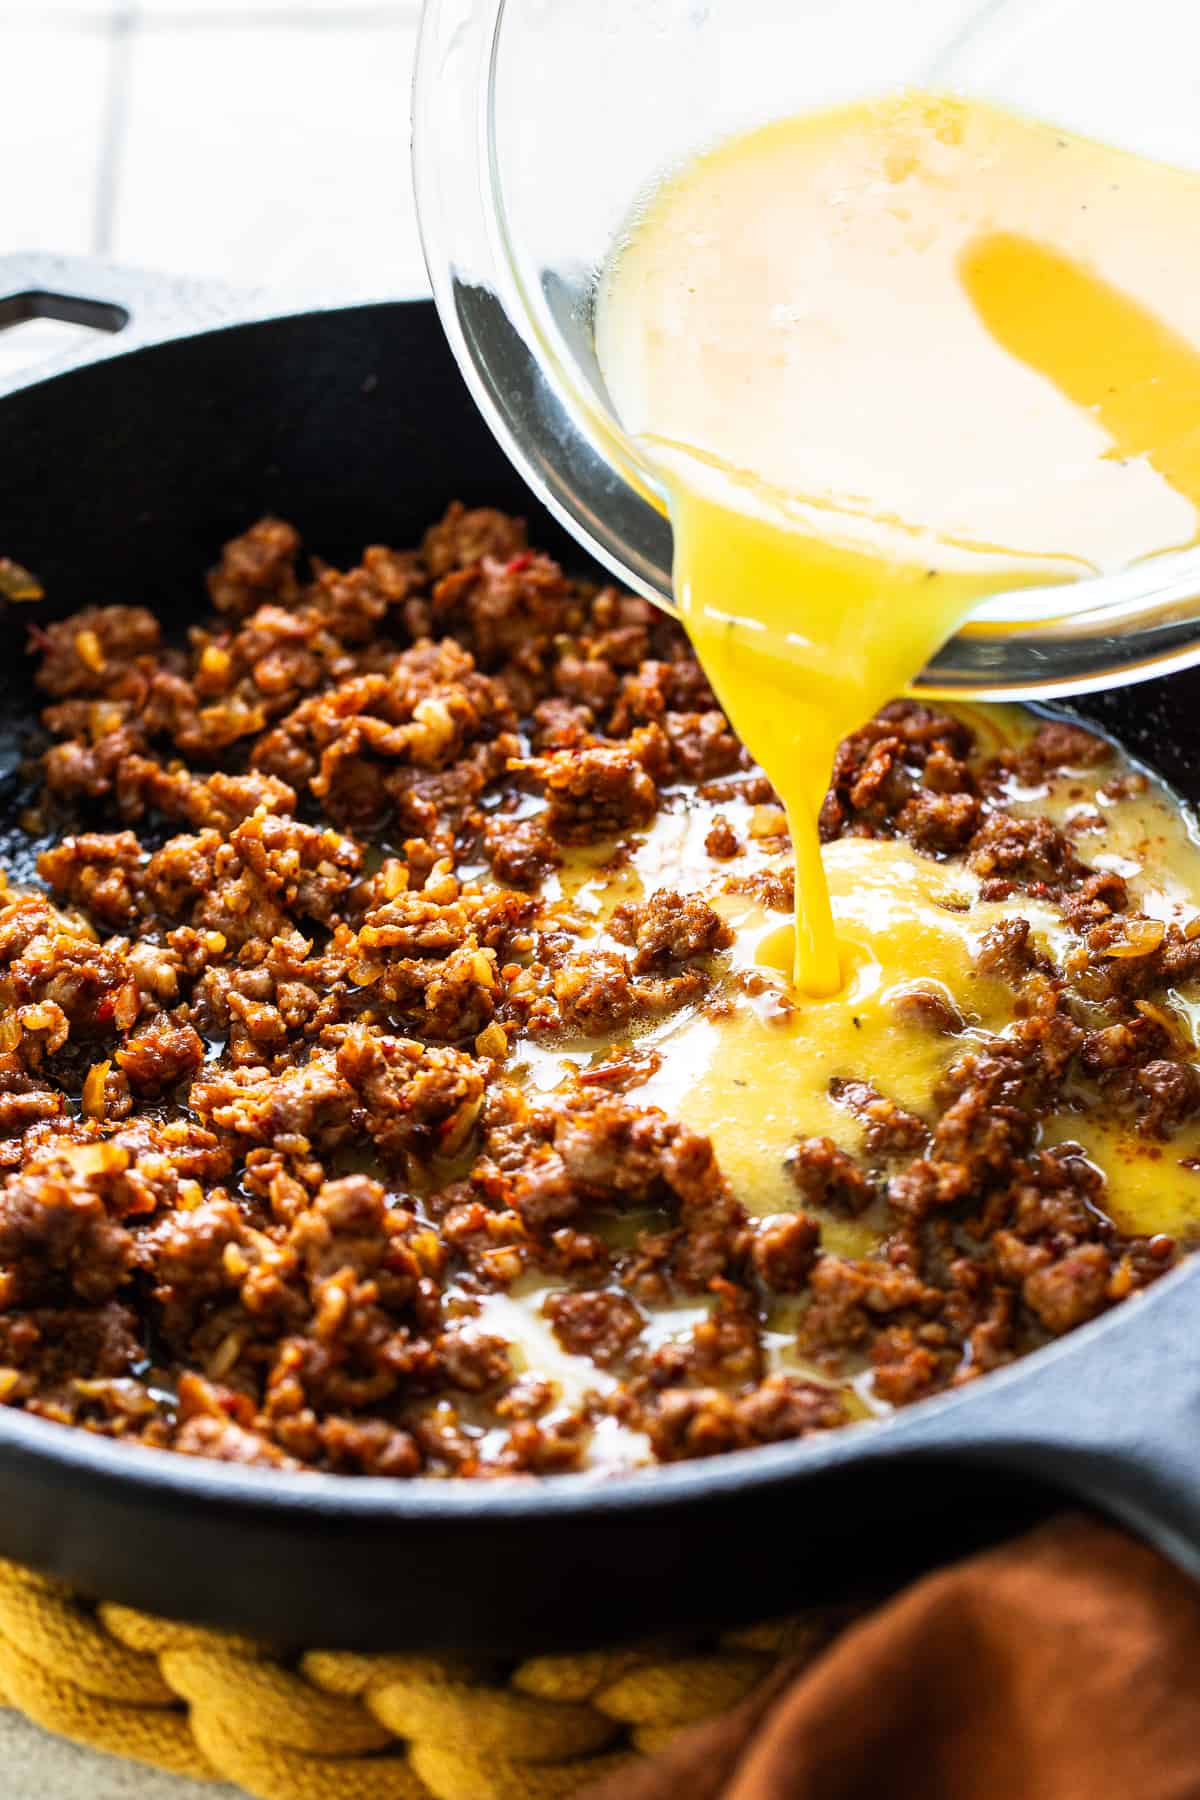 Beaten eggs being poured into a skillet of cooked Mexican chorizo.